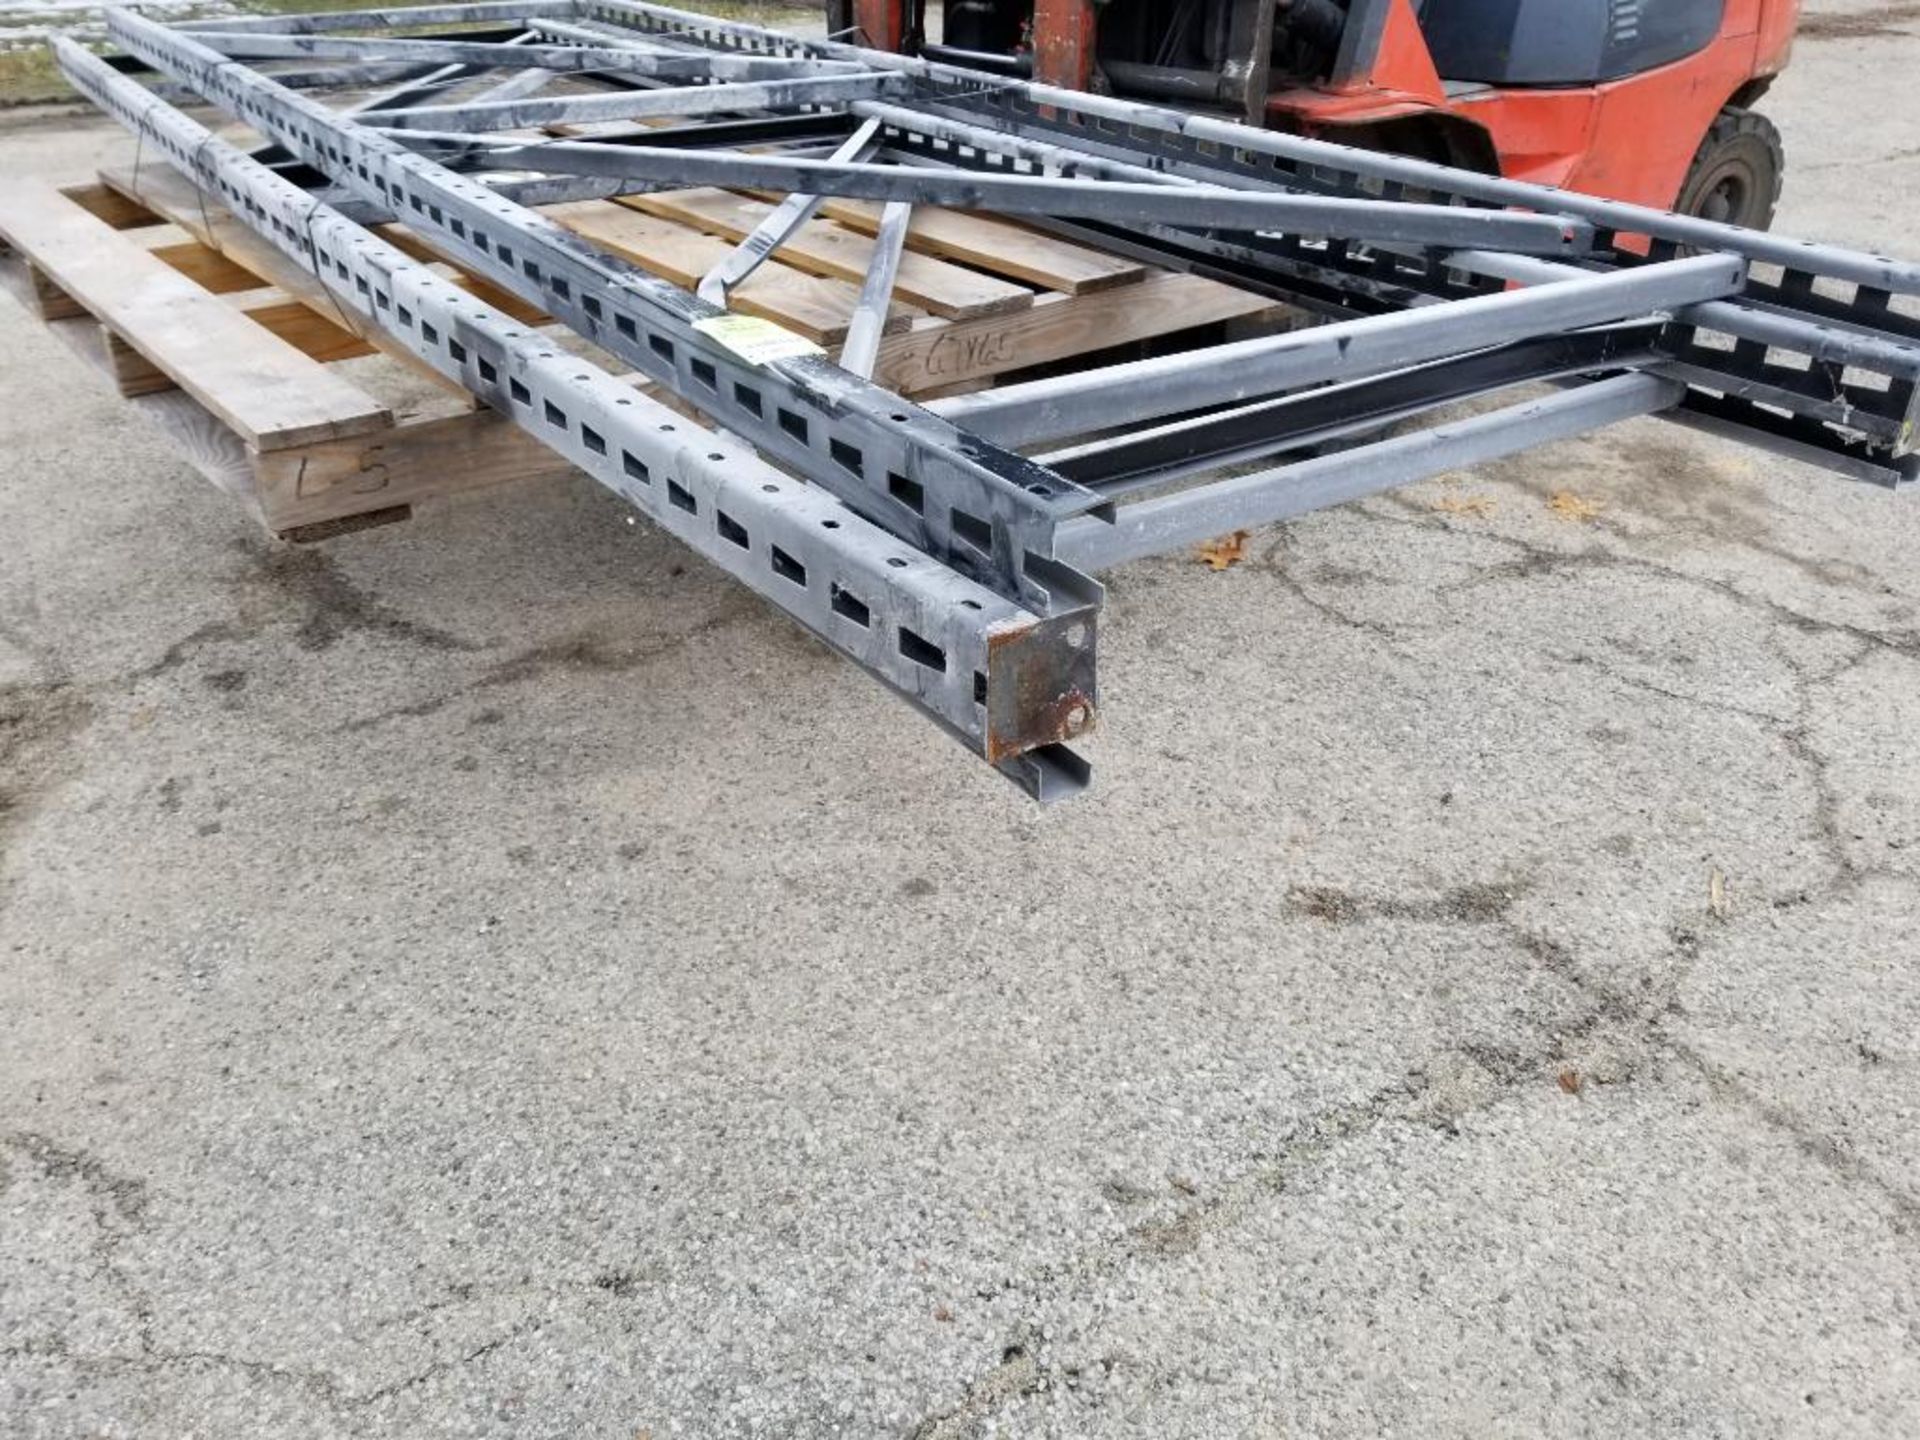 Qty 3 - Pallet racking uprights. 144in tall x 42in wide. - Image 2 of 6